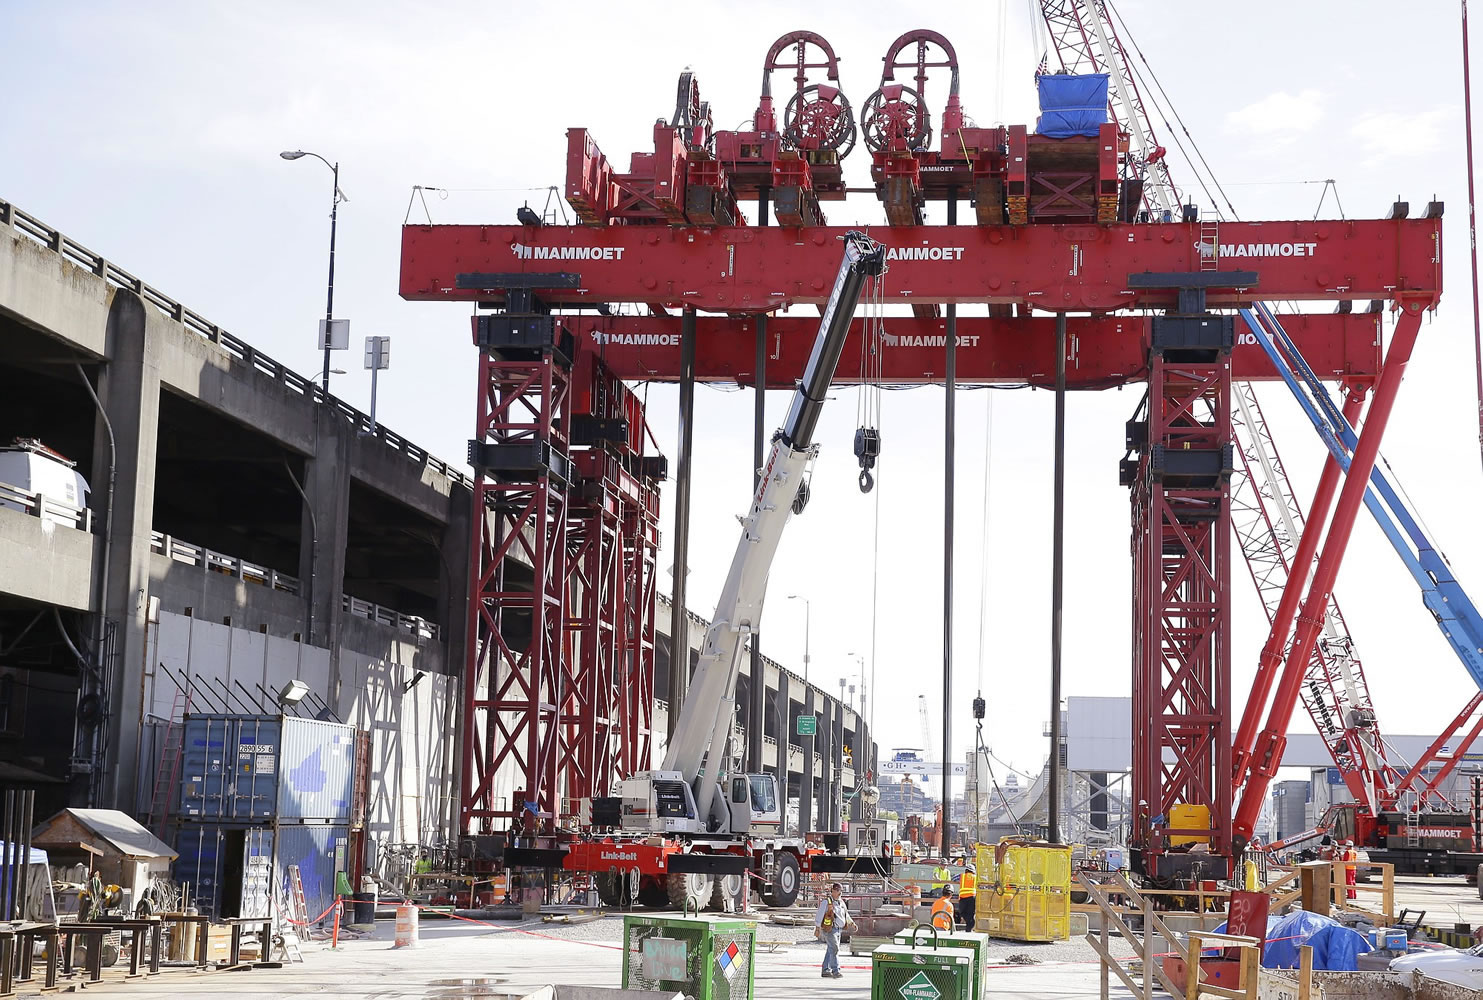 A massive crane is used Monday to lift a 2,000-ton section of the tunnel boring machine known as Bertha that is currently stalled underground and awaiting repairs in Seattleund to the machine.